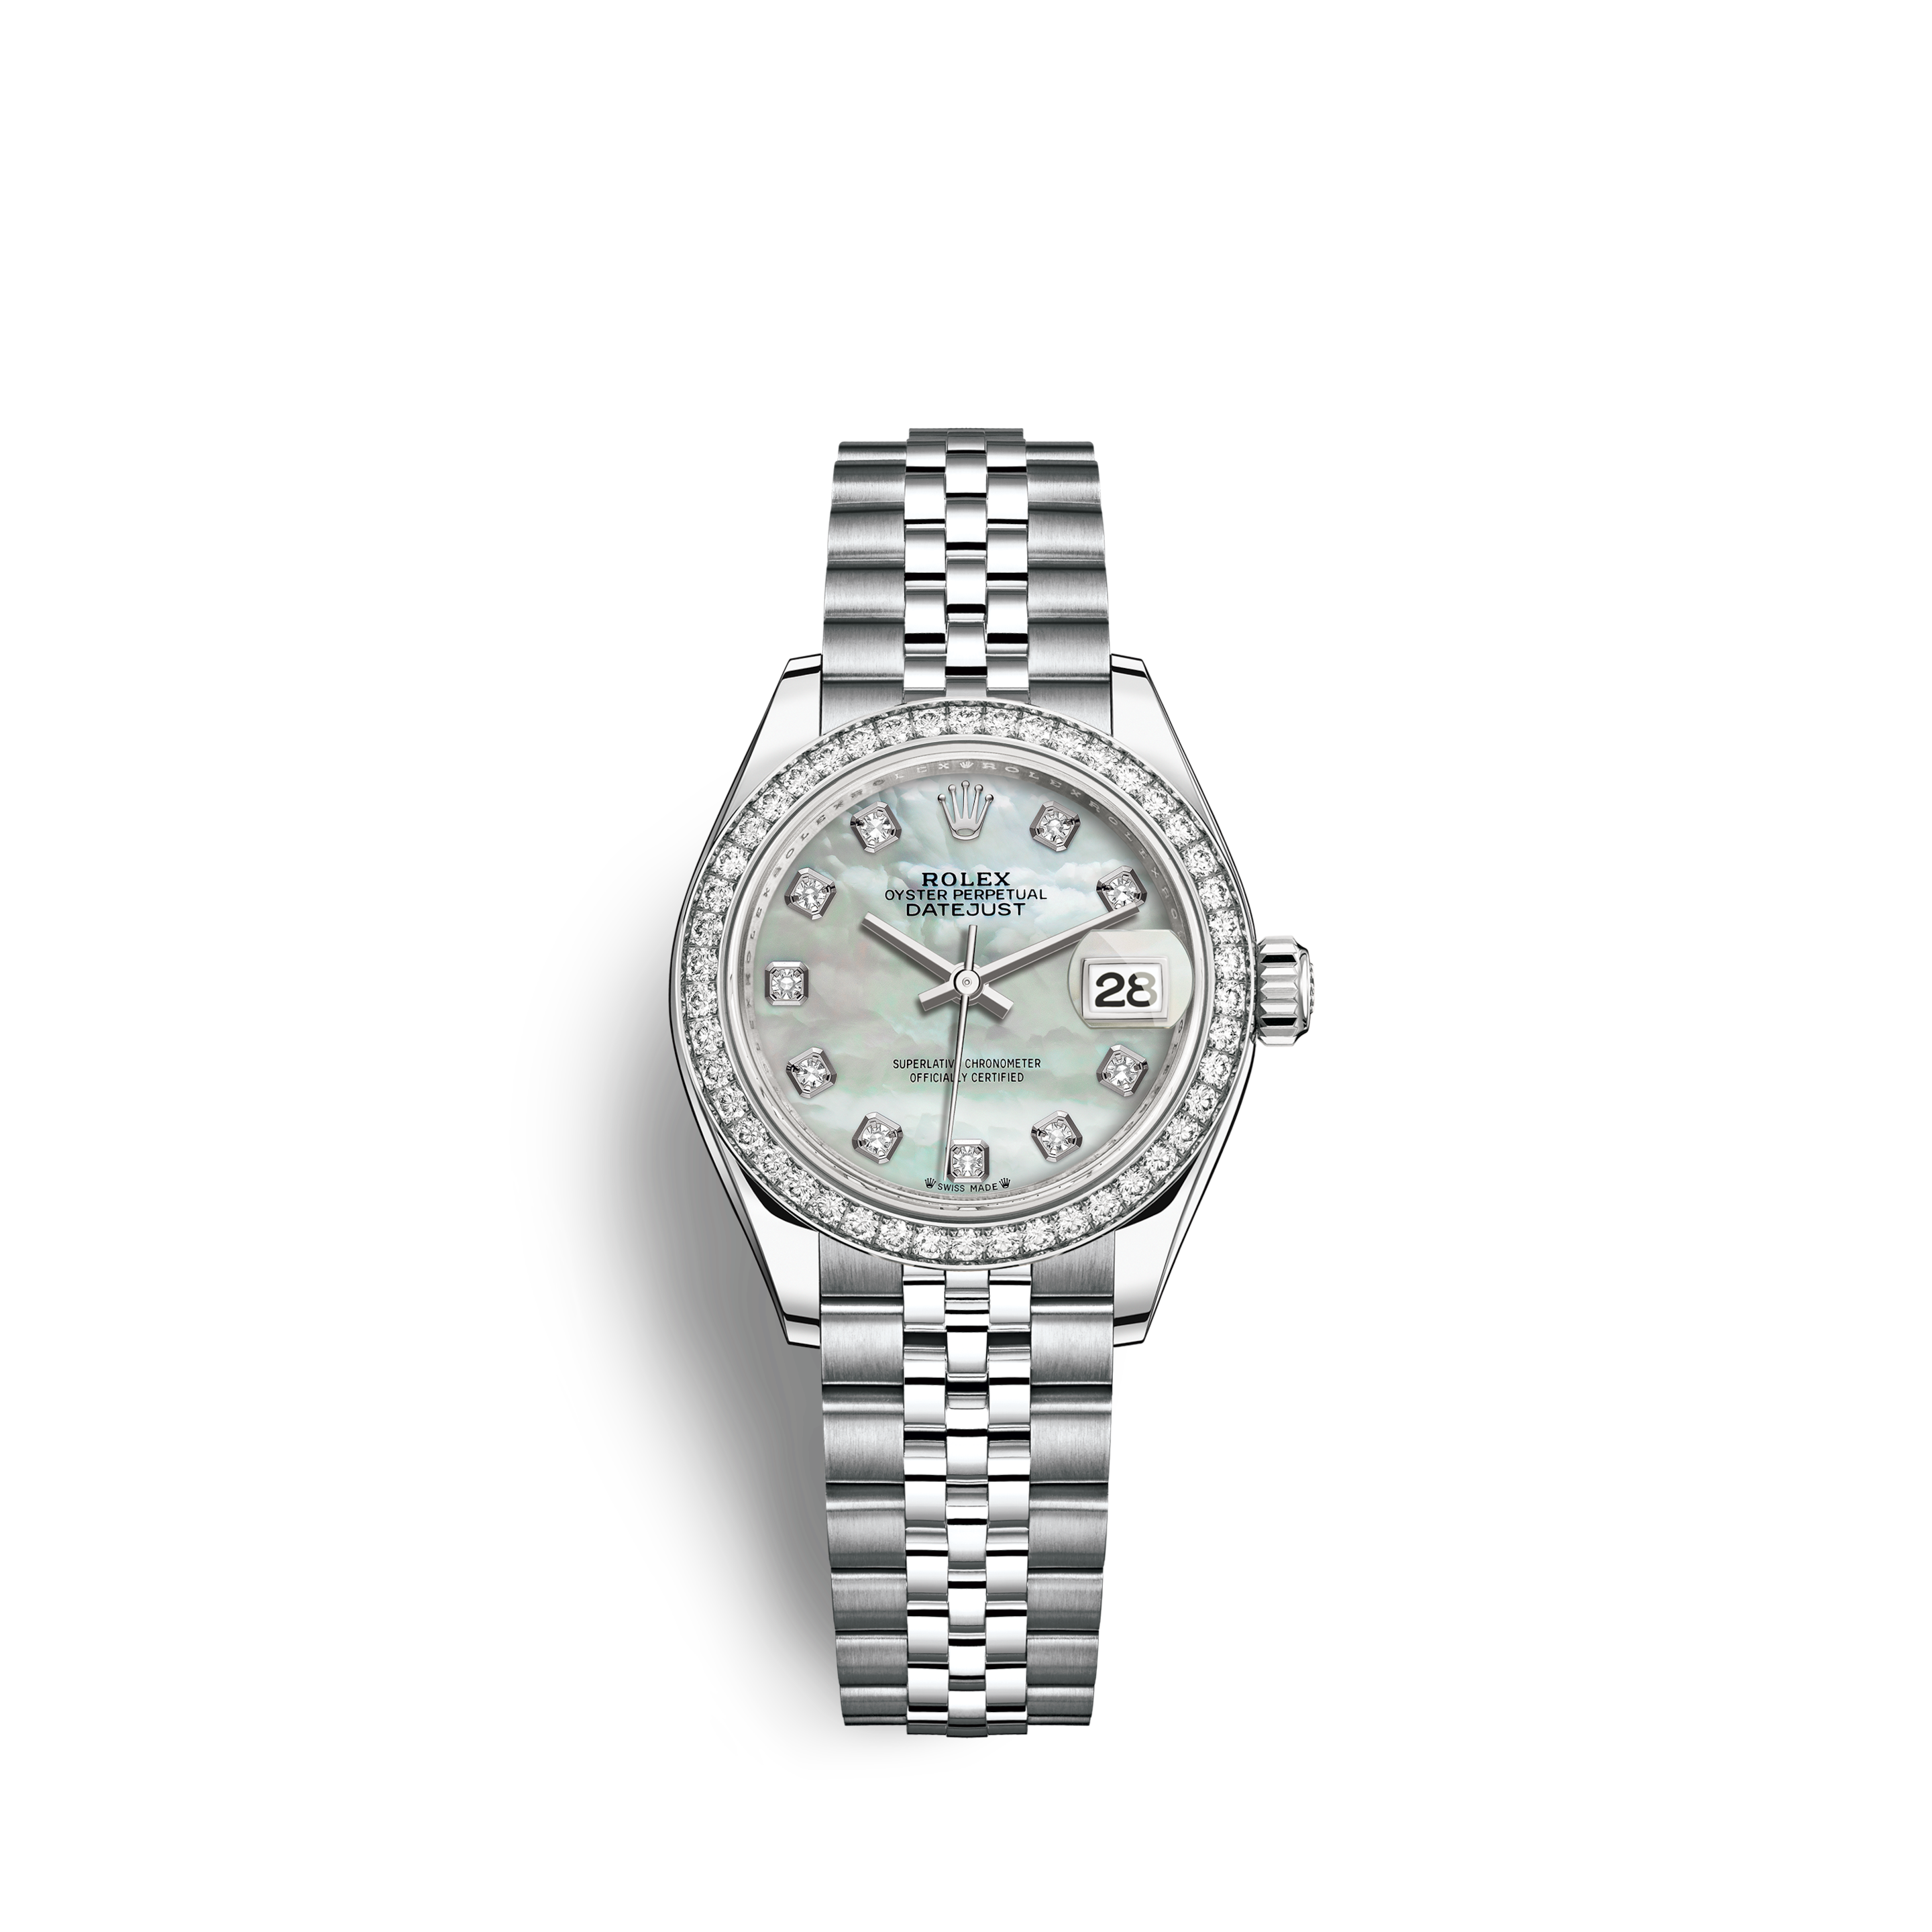 rolex for women for sale